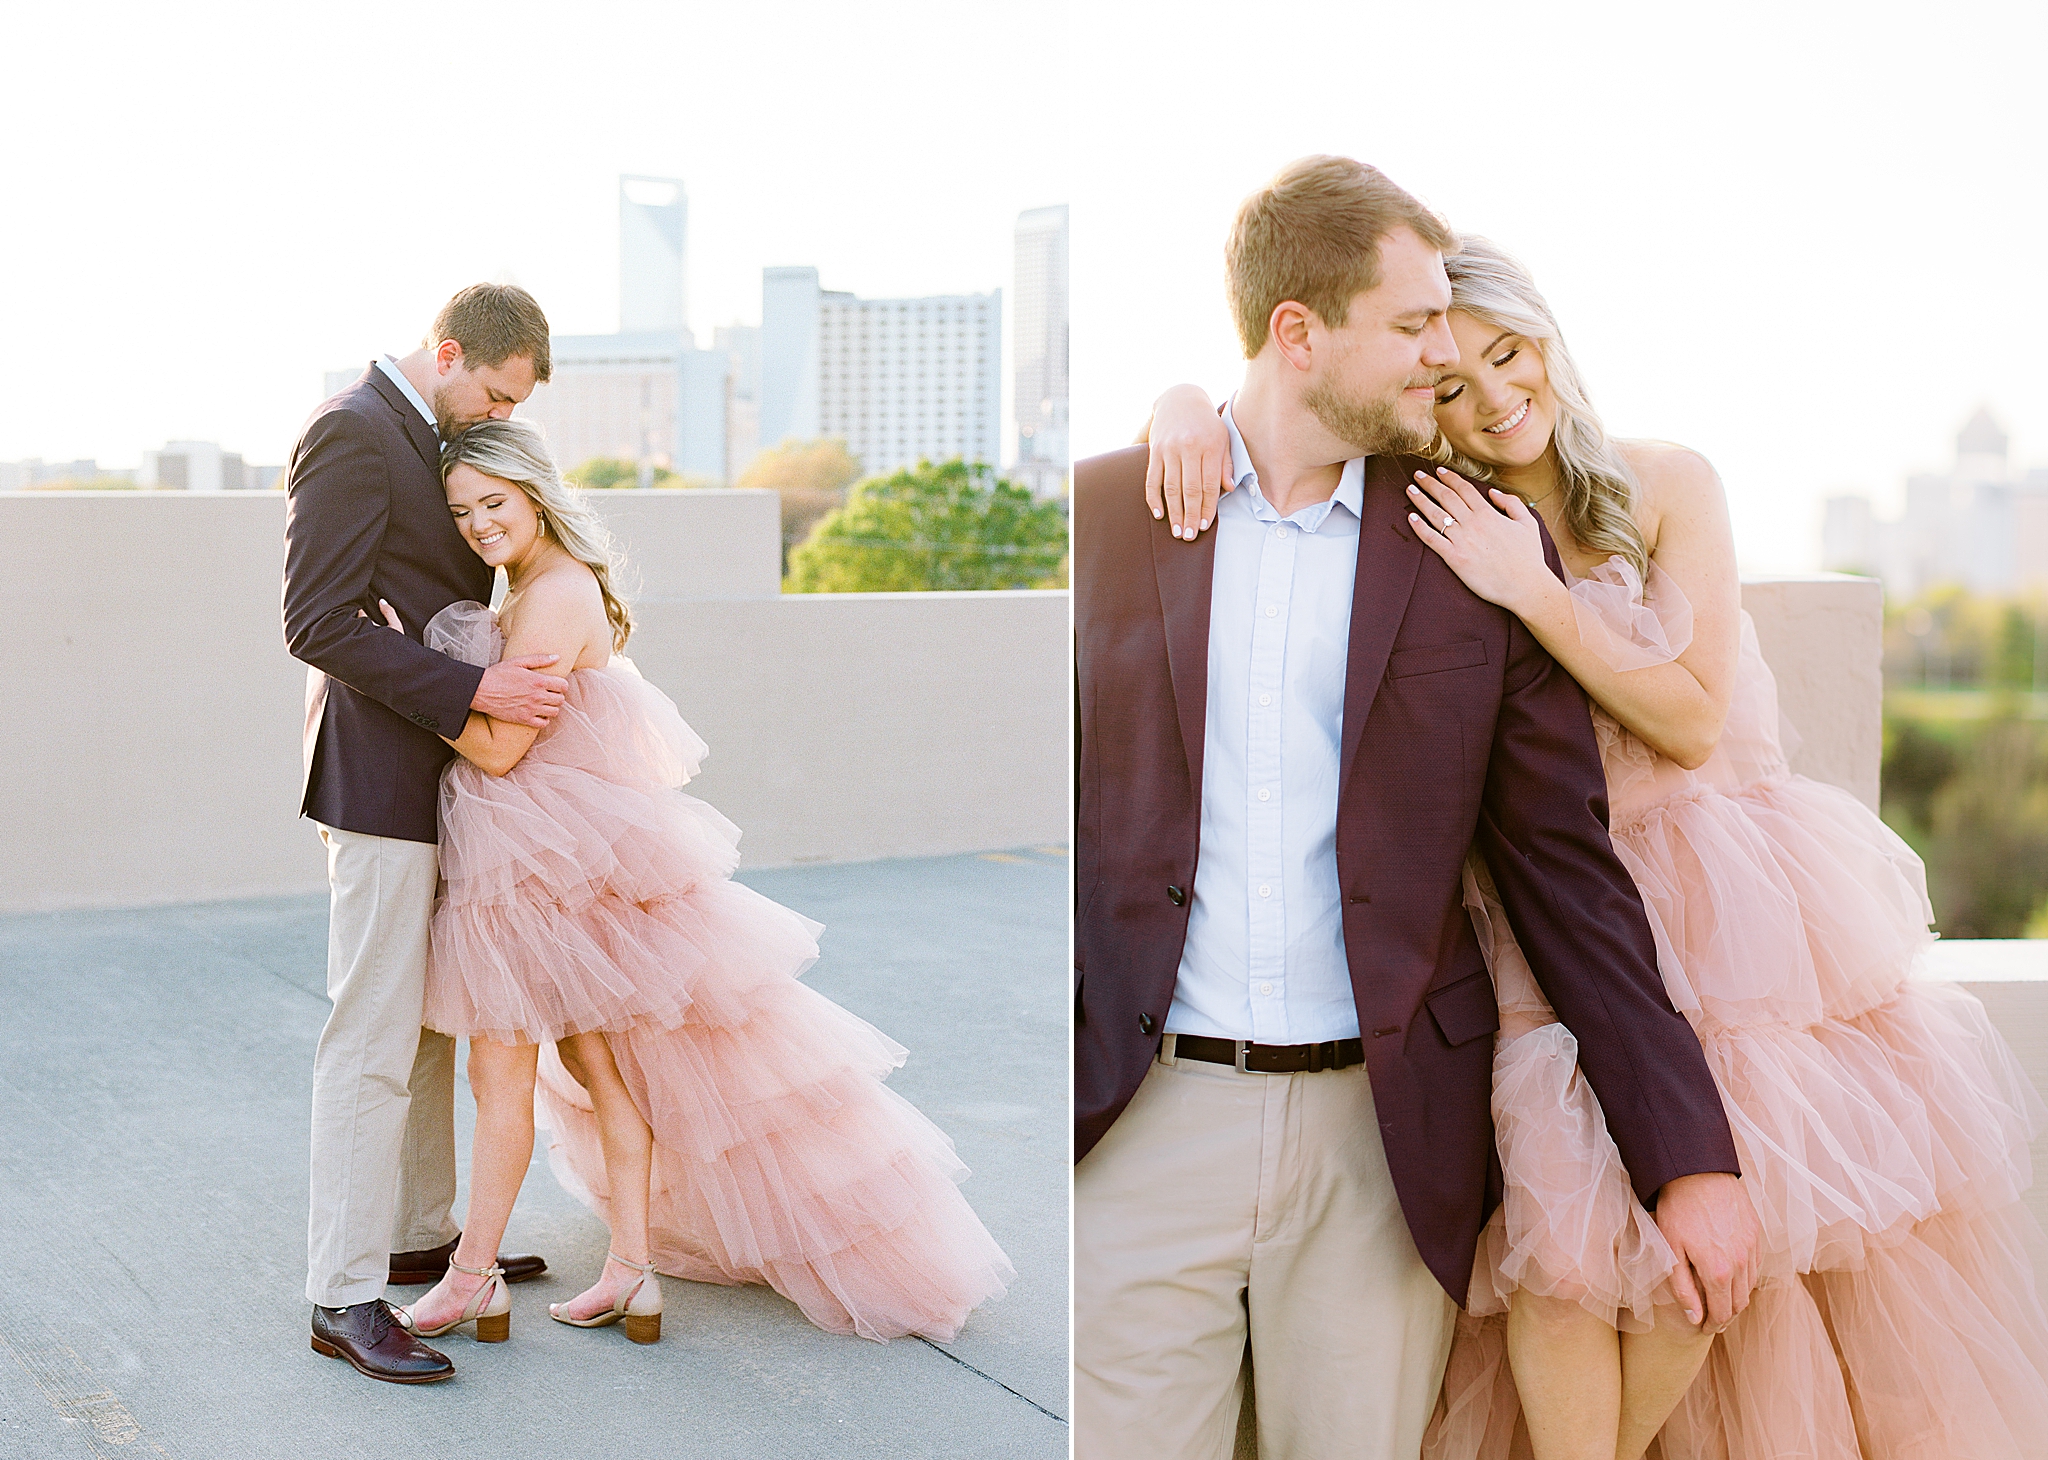 sunset engagement portraits on rooftop in Charlotte NC